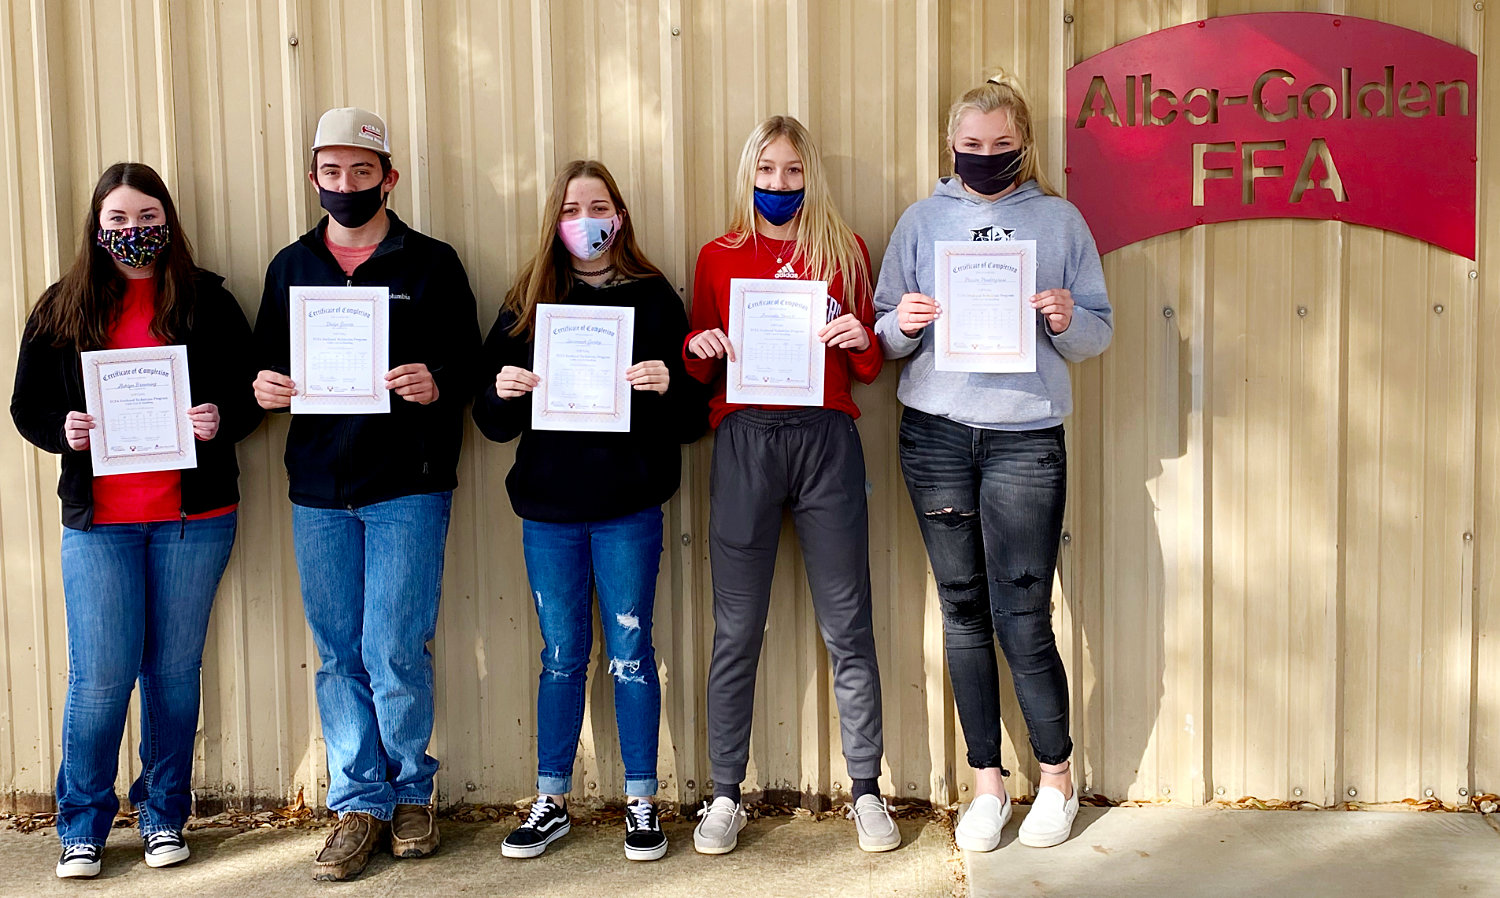 Pictured from left, Alba-Golden students earning their feedyard technician certification are Ashtyn Browning, Dodge Gaines, Savannah Gurley, Amanda Stewart and Paislee Pendergrass. Not pictured is Nikki Meade.